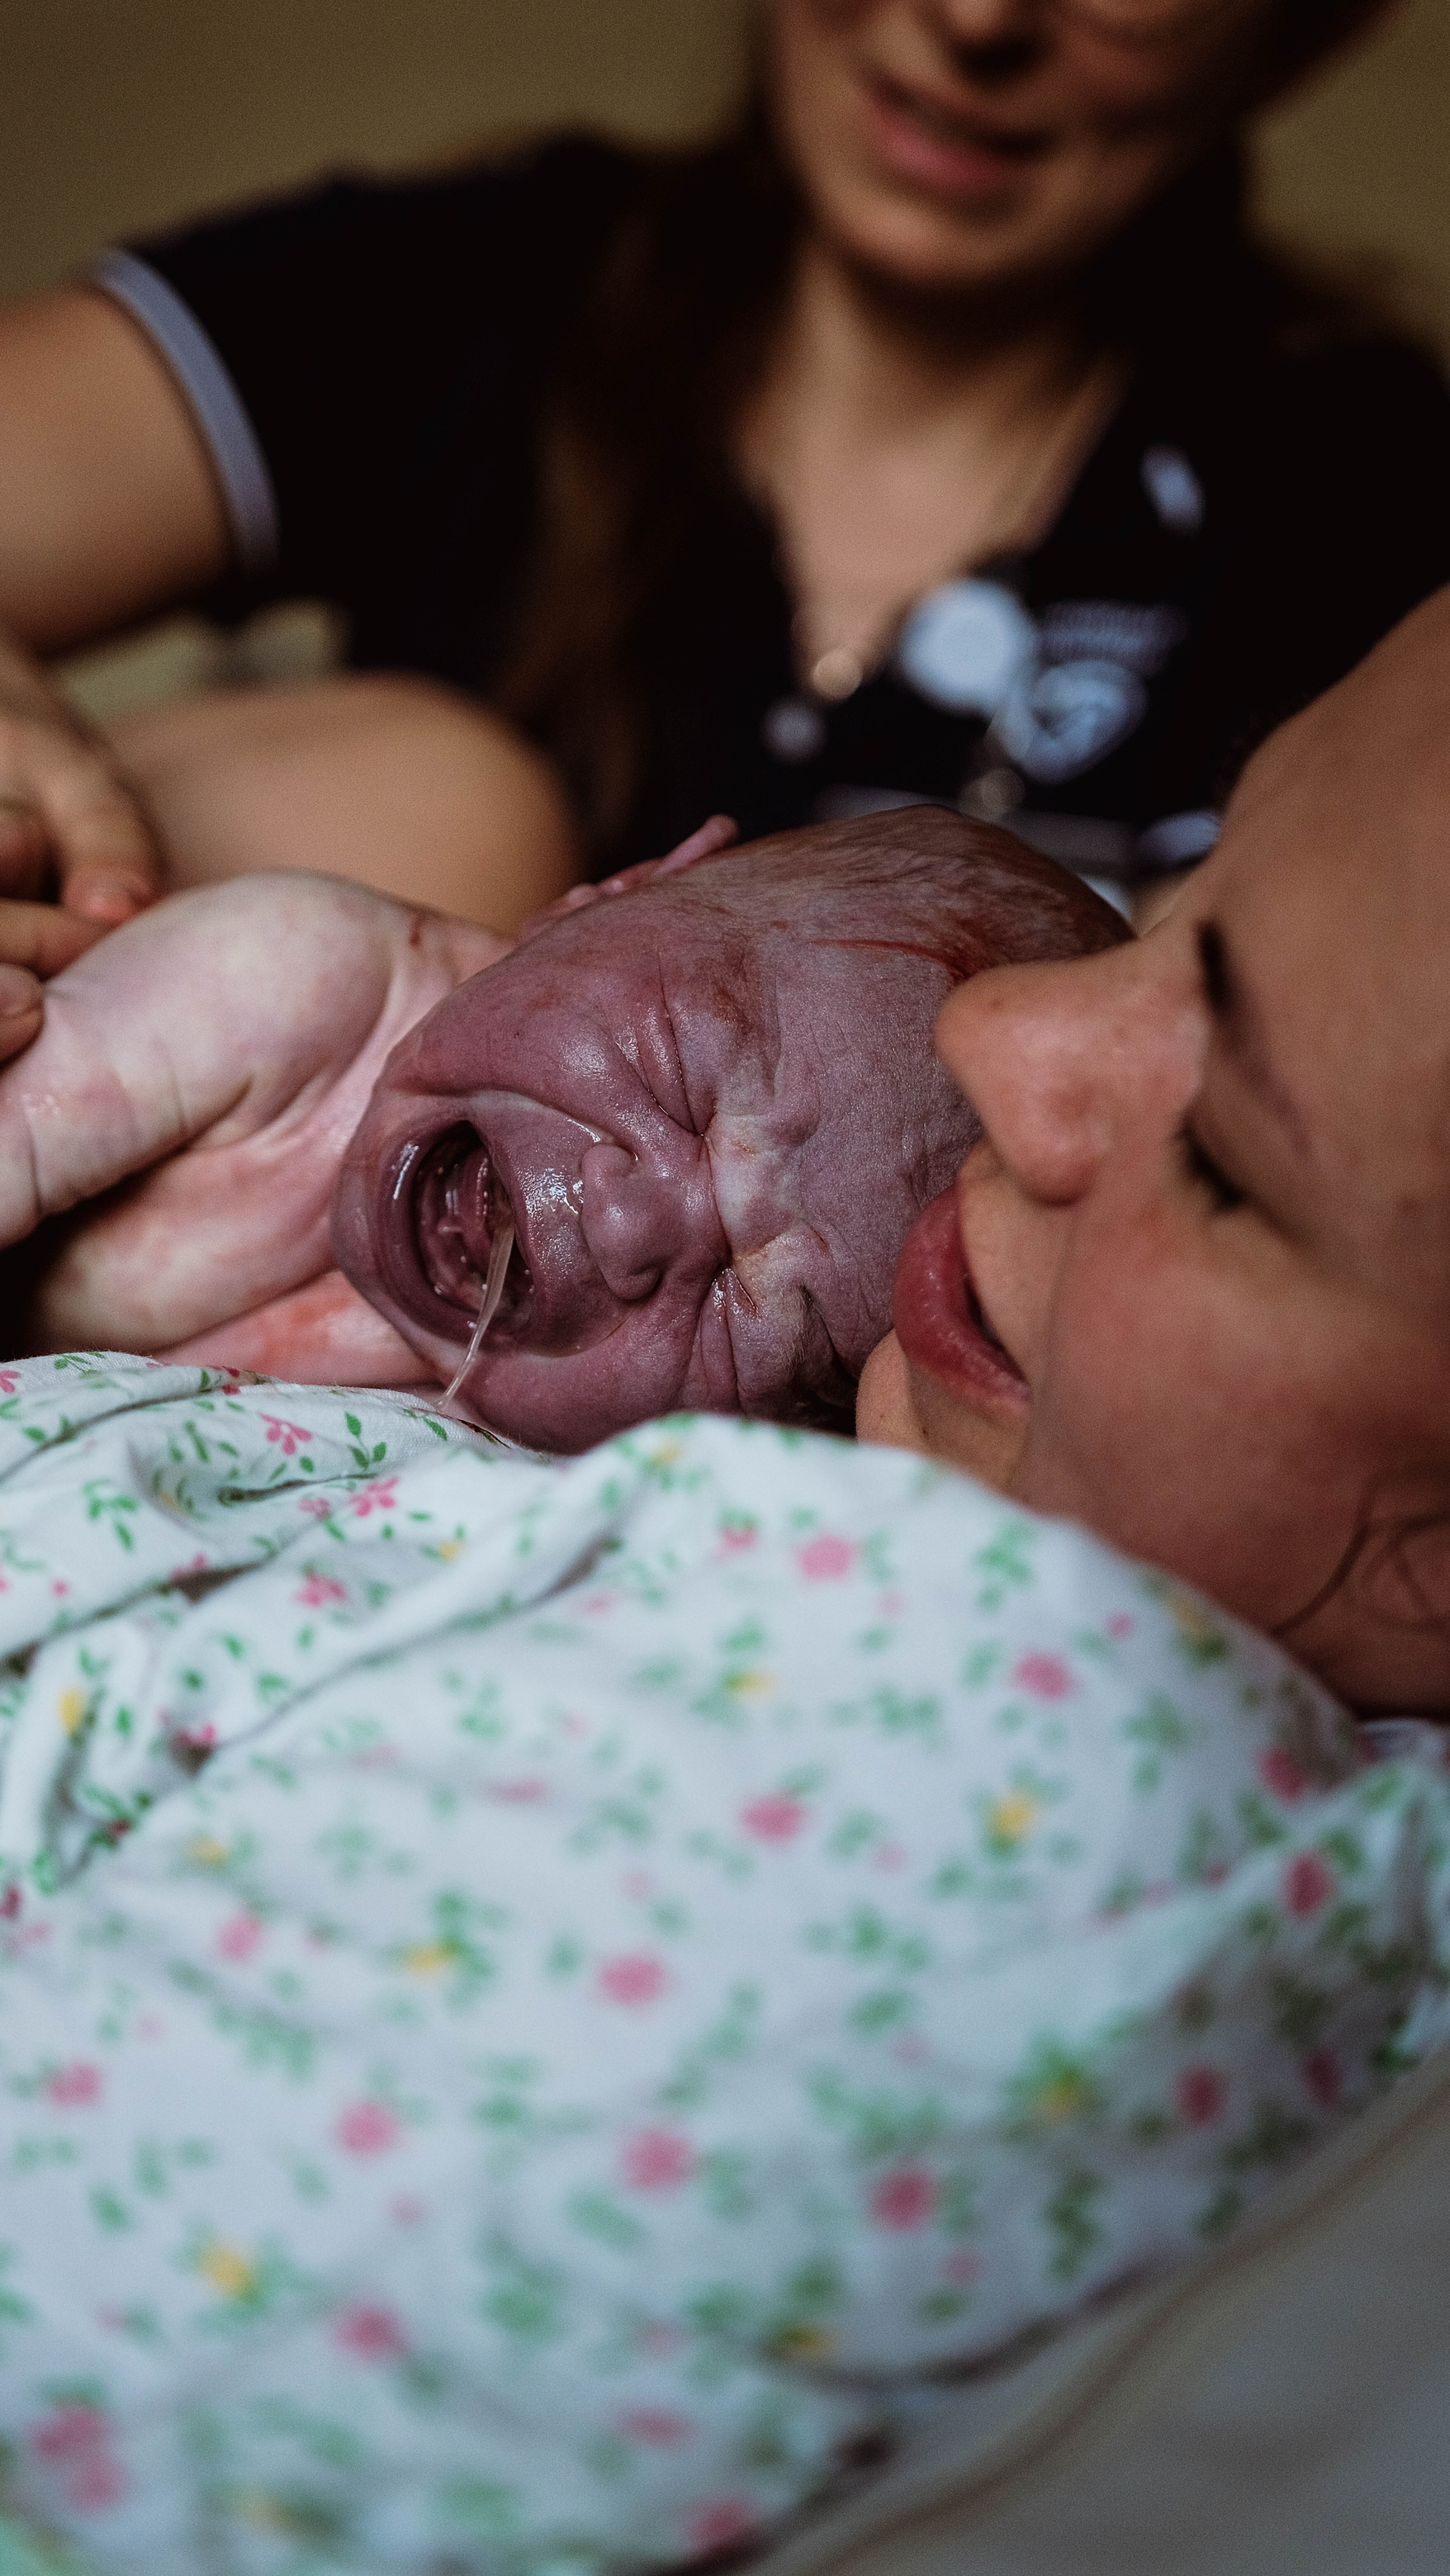 A Mother Gave Birth to a Newborn